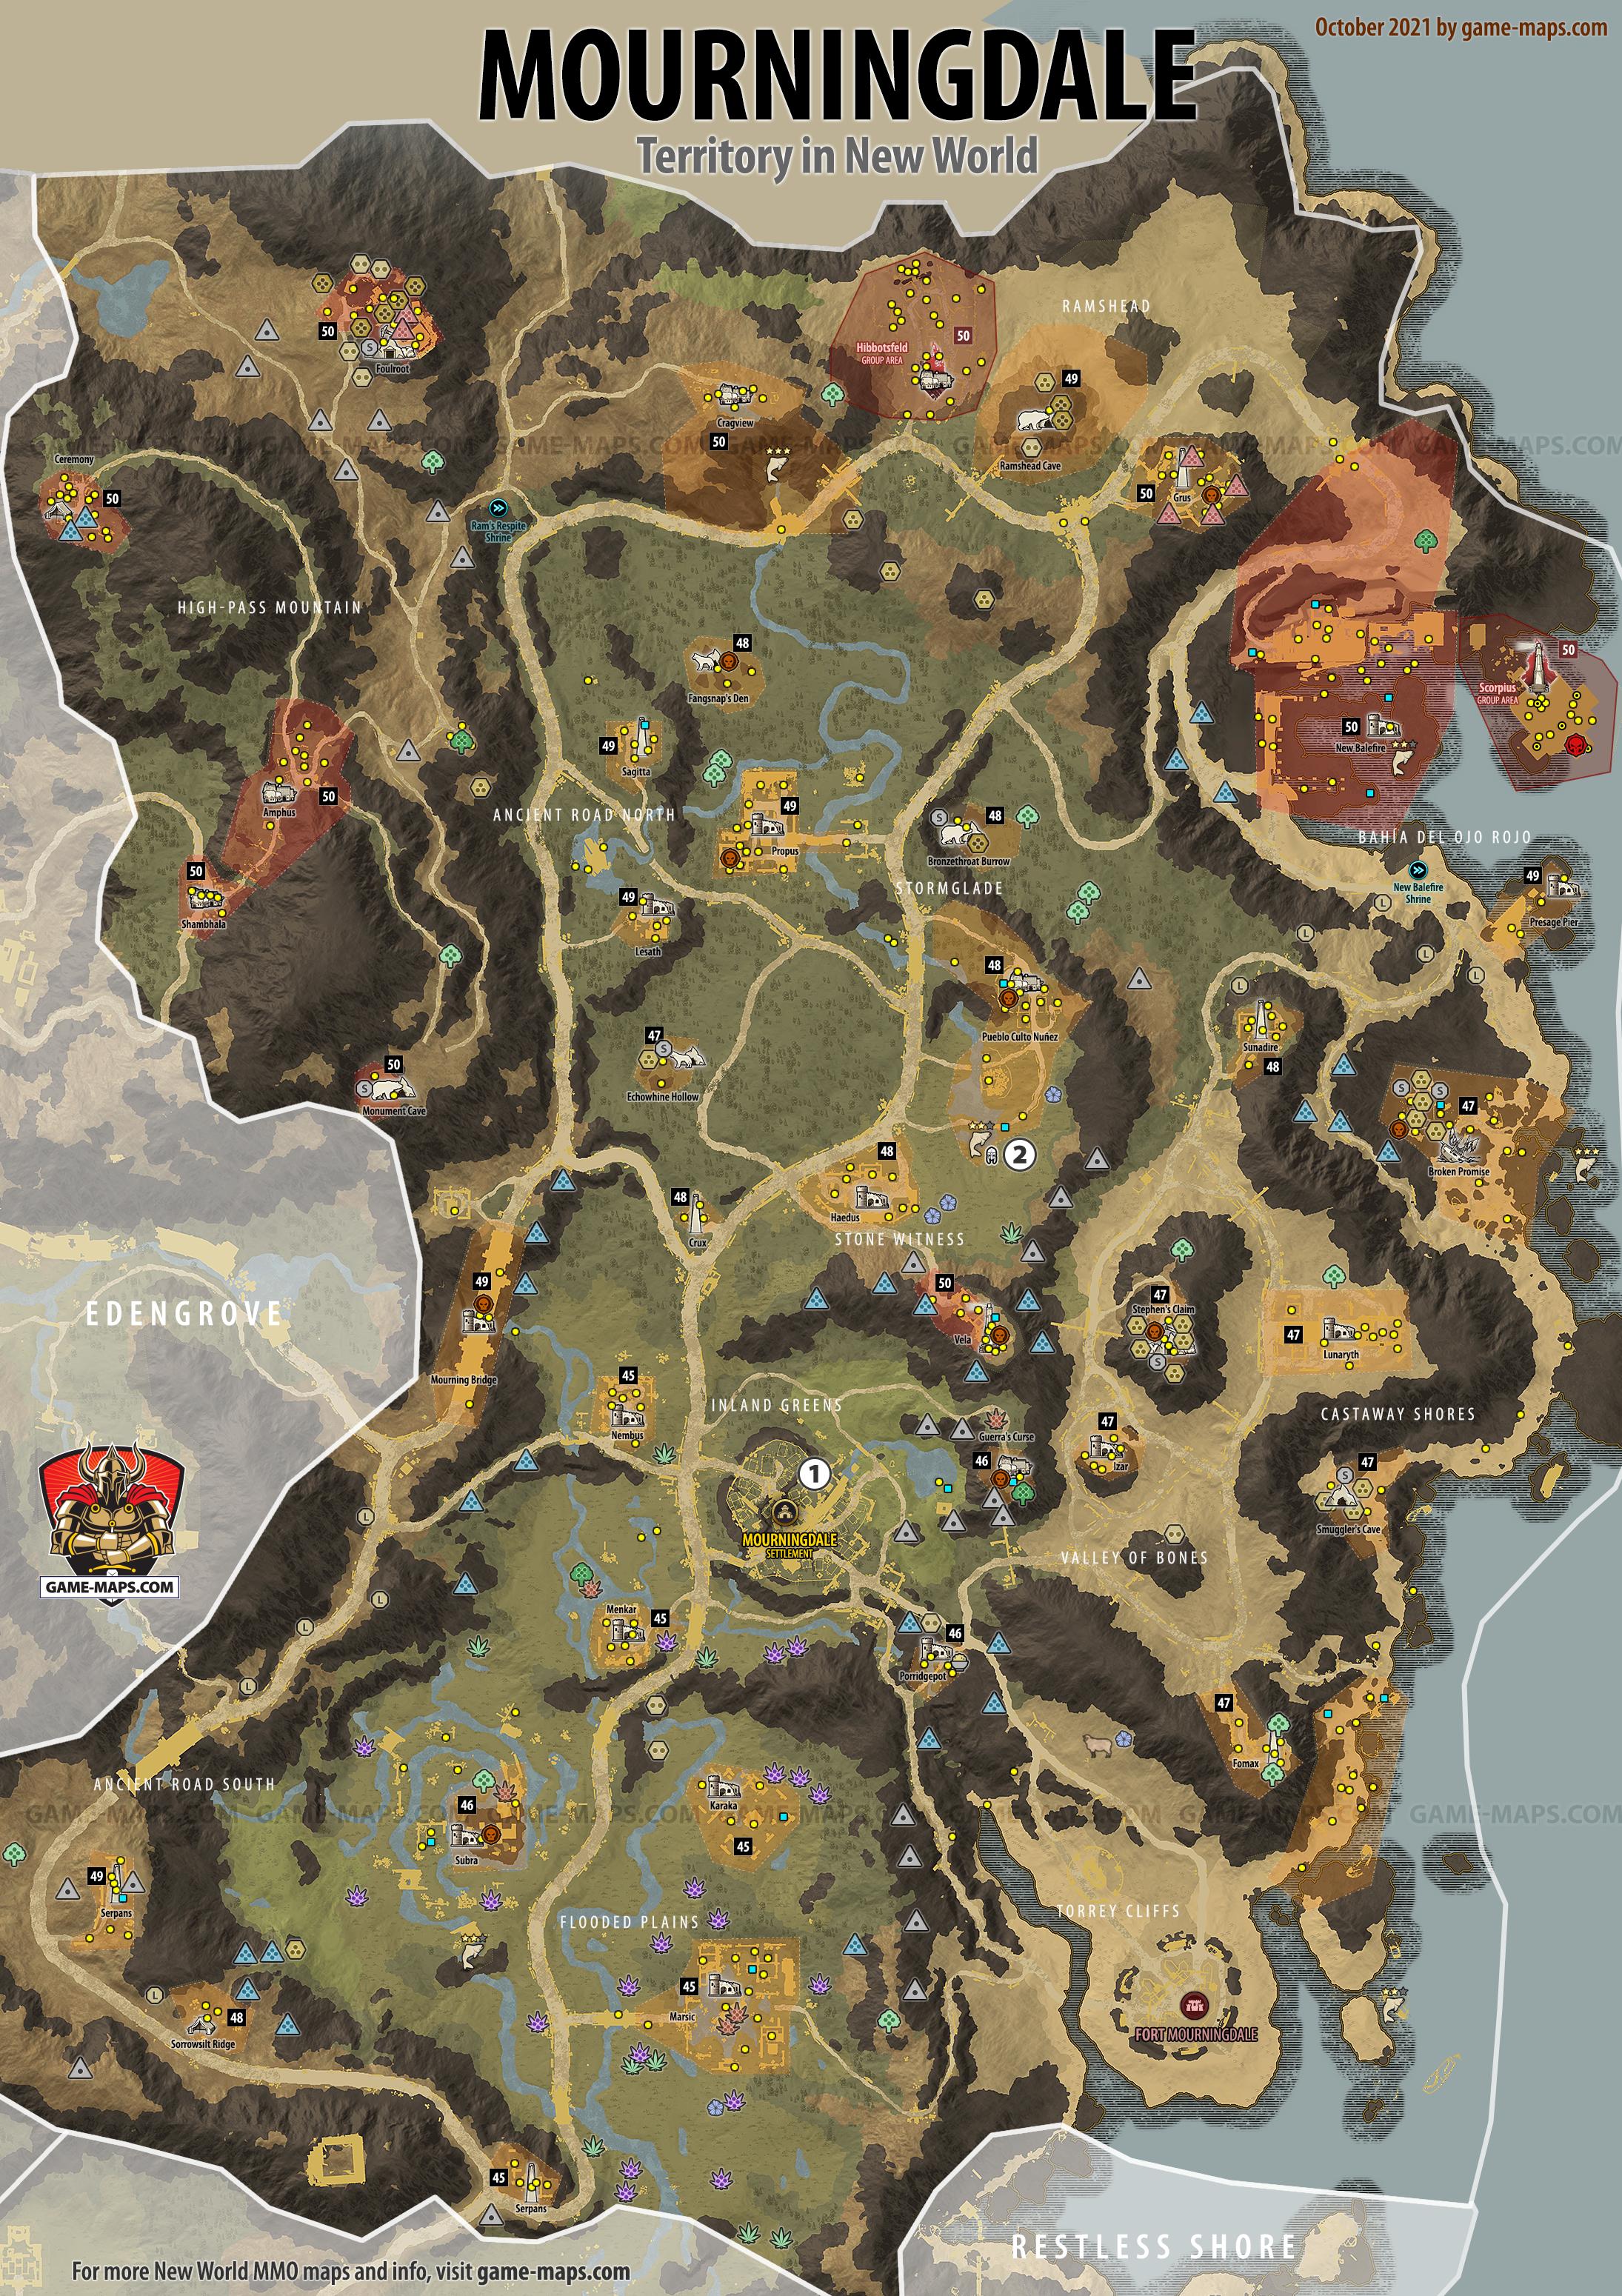 Mourningdale Territory Map for New World MMO